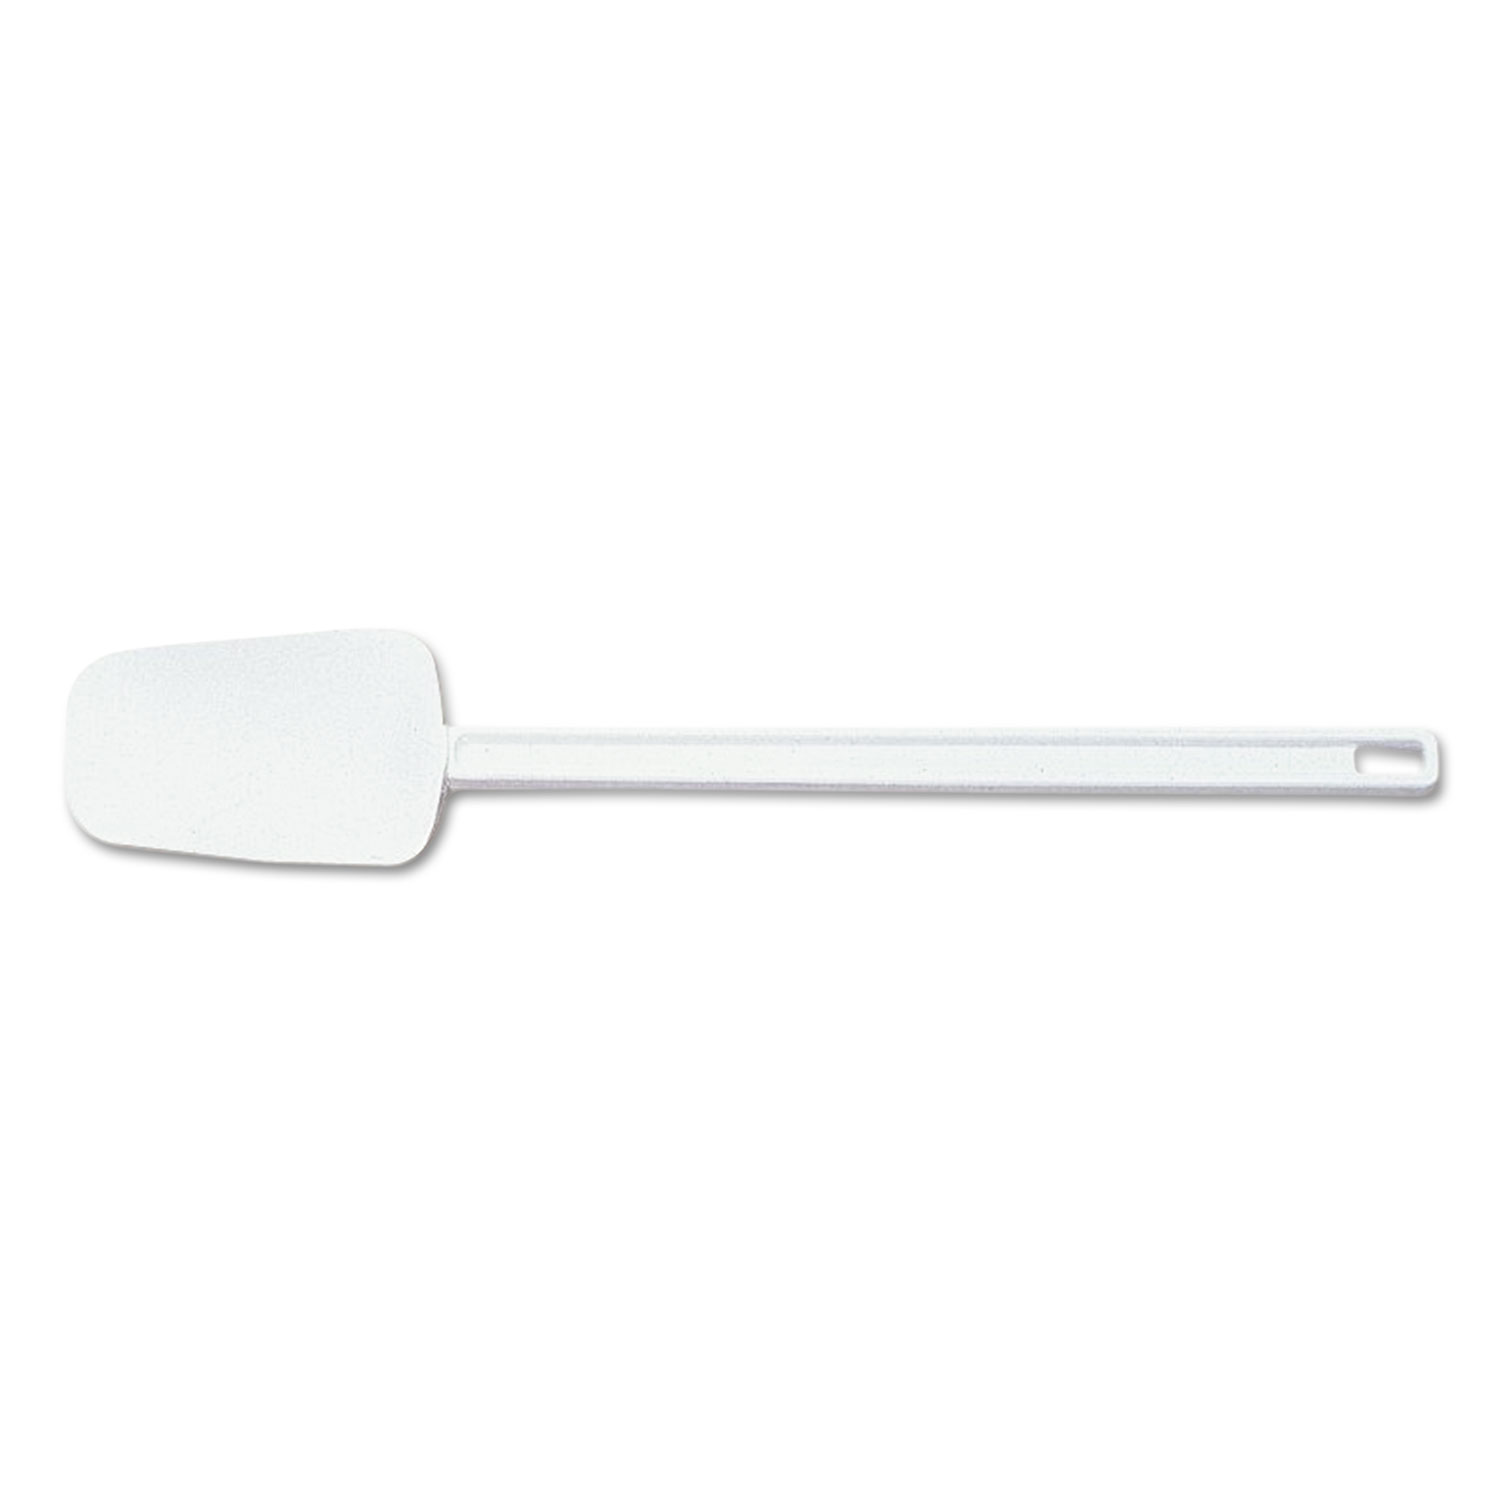 Spoon-Shaped Spatula, 16 1/2 in, White